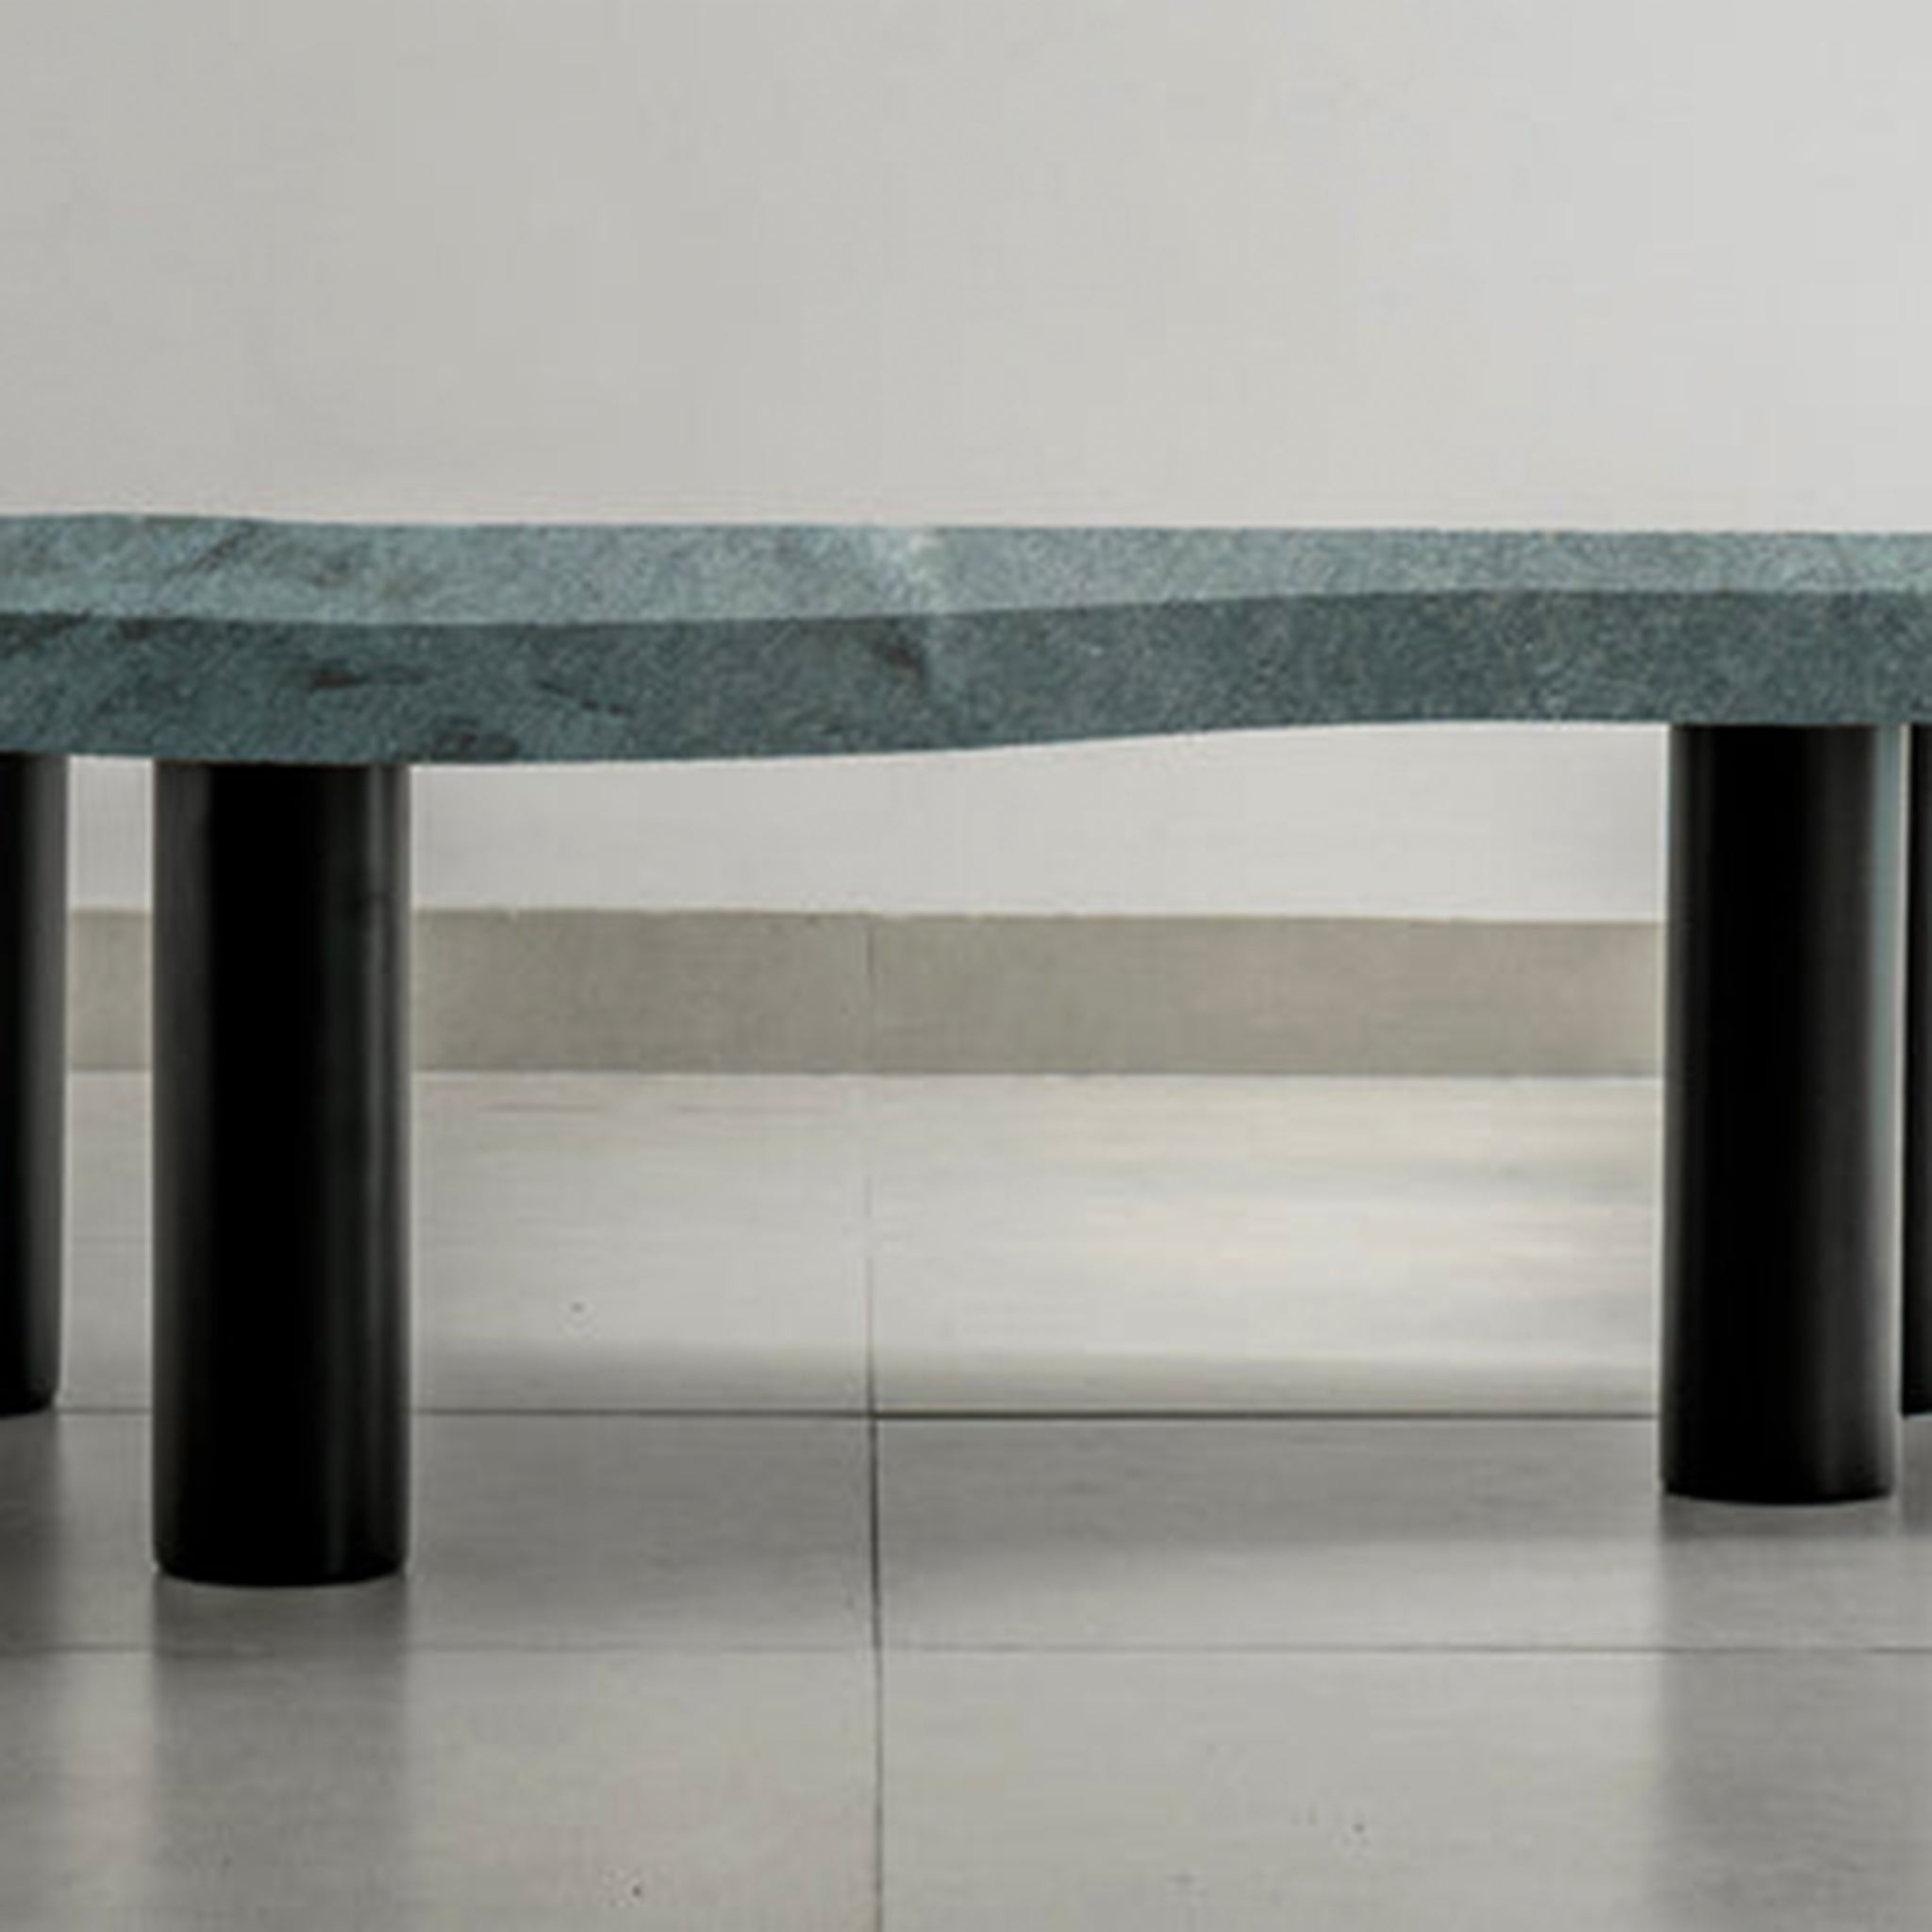 Handcrafted Coffee Table: The Peggy Table showcases the beauty of natural stone.